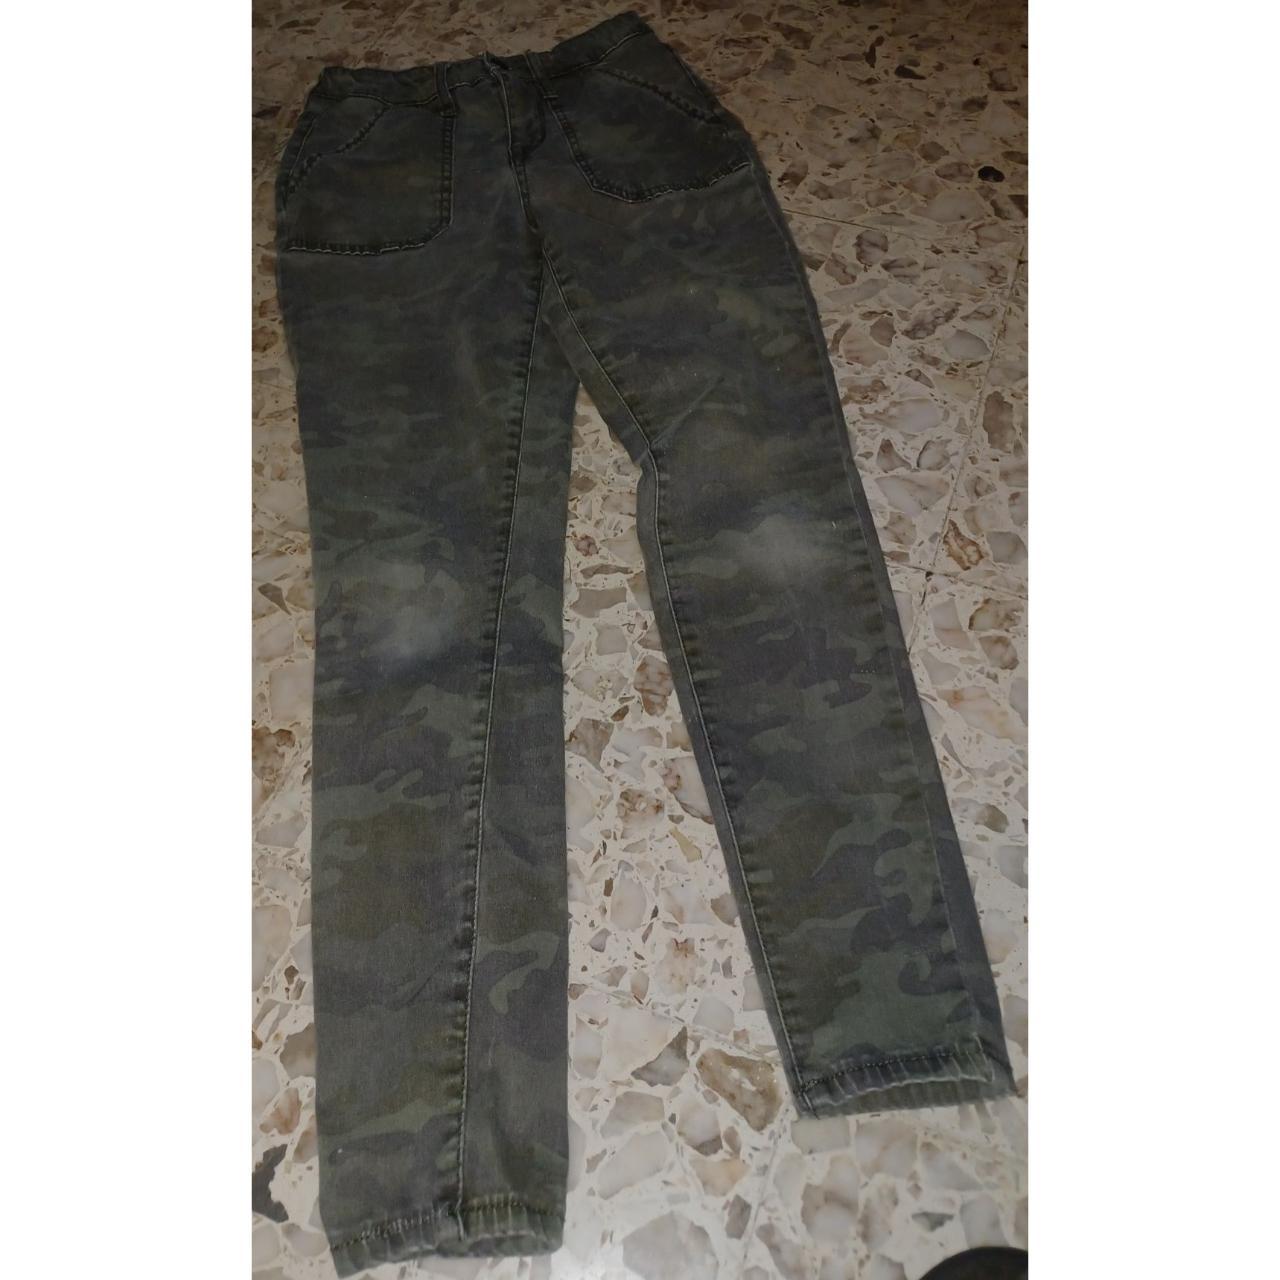 Mossimo Supply Co. Ladies Camo Skinny Jeans Jeggings - Depop